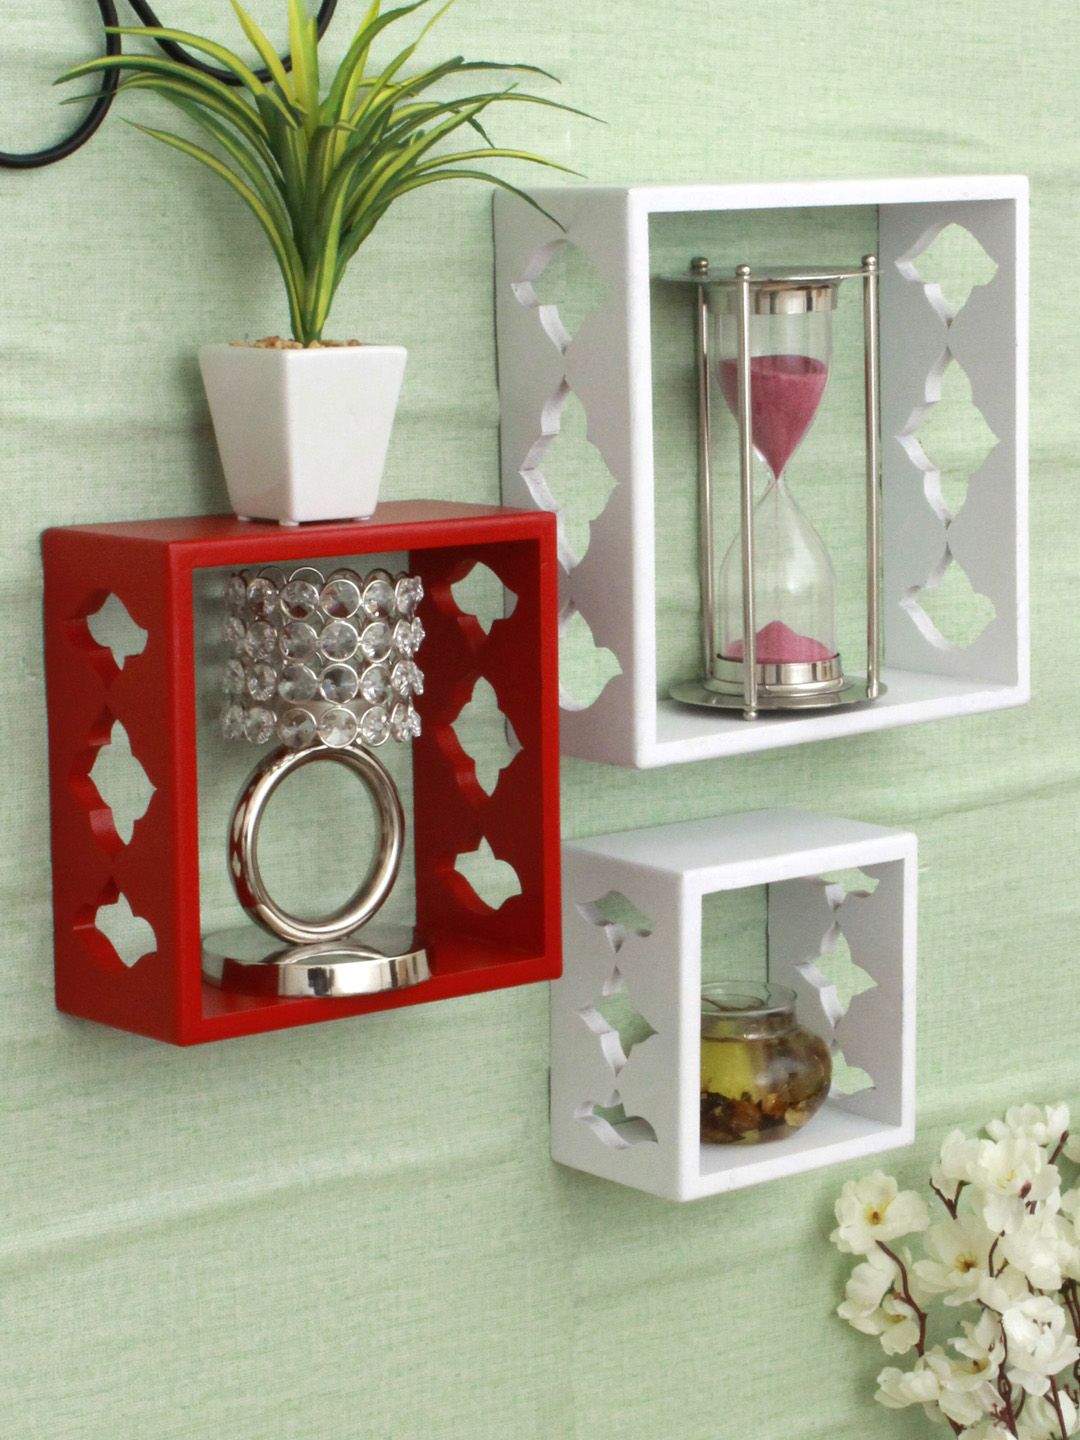 Home Sparkle Set Of 3 Mdf Pocket Wall Shelves Price in India